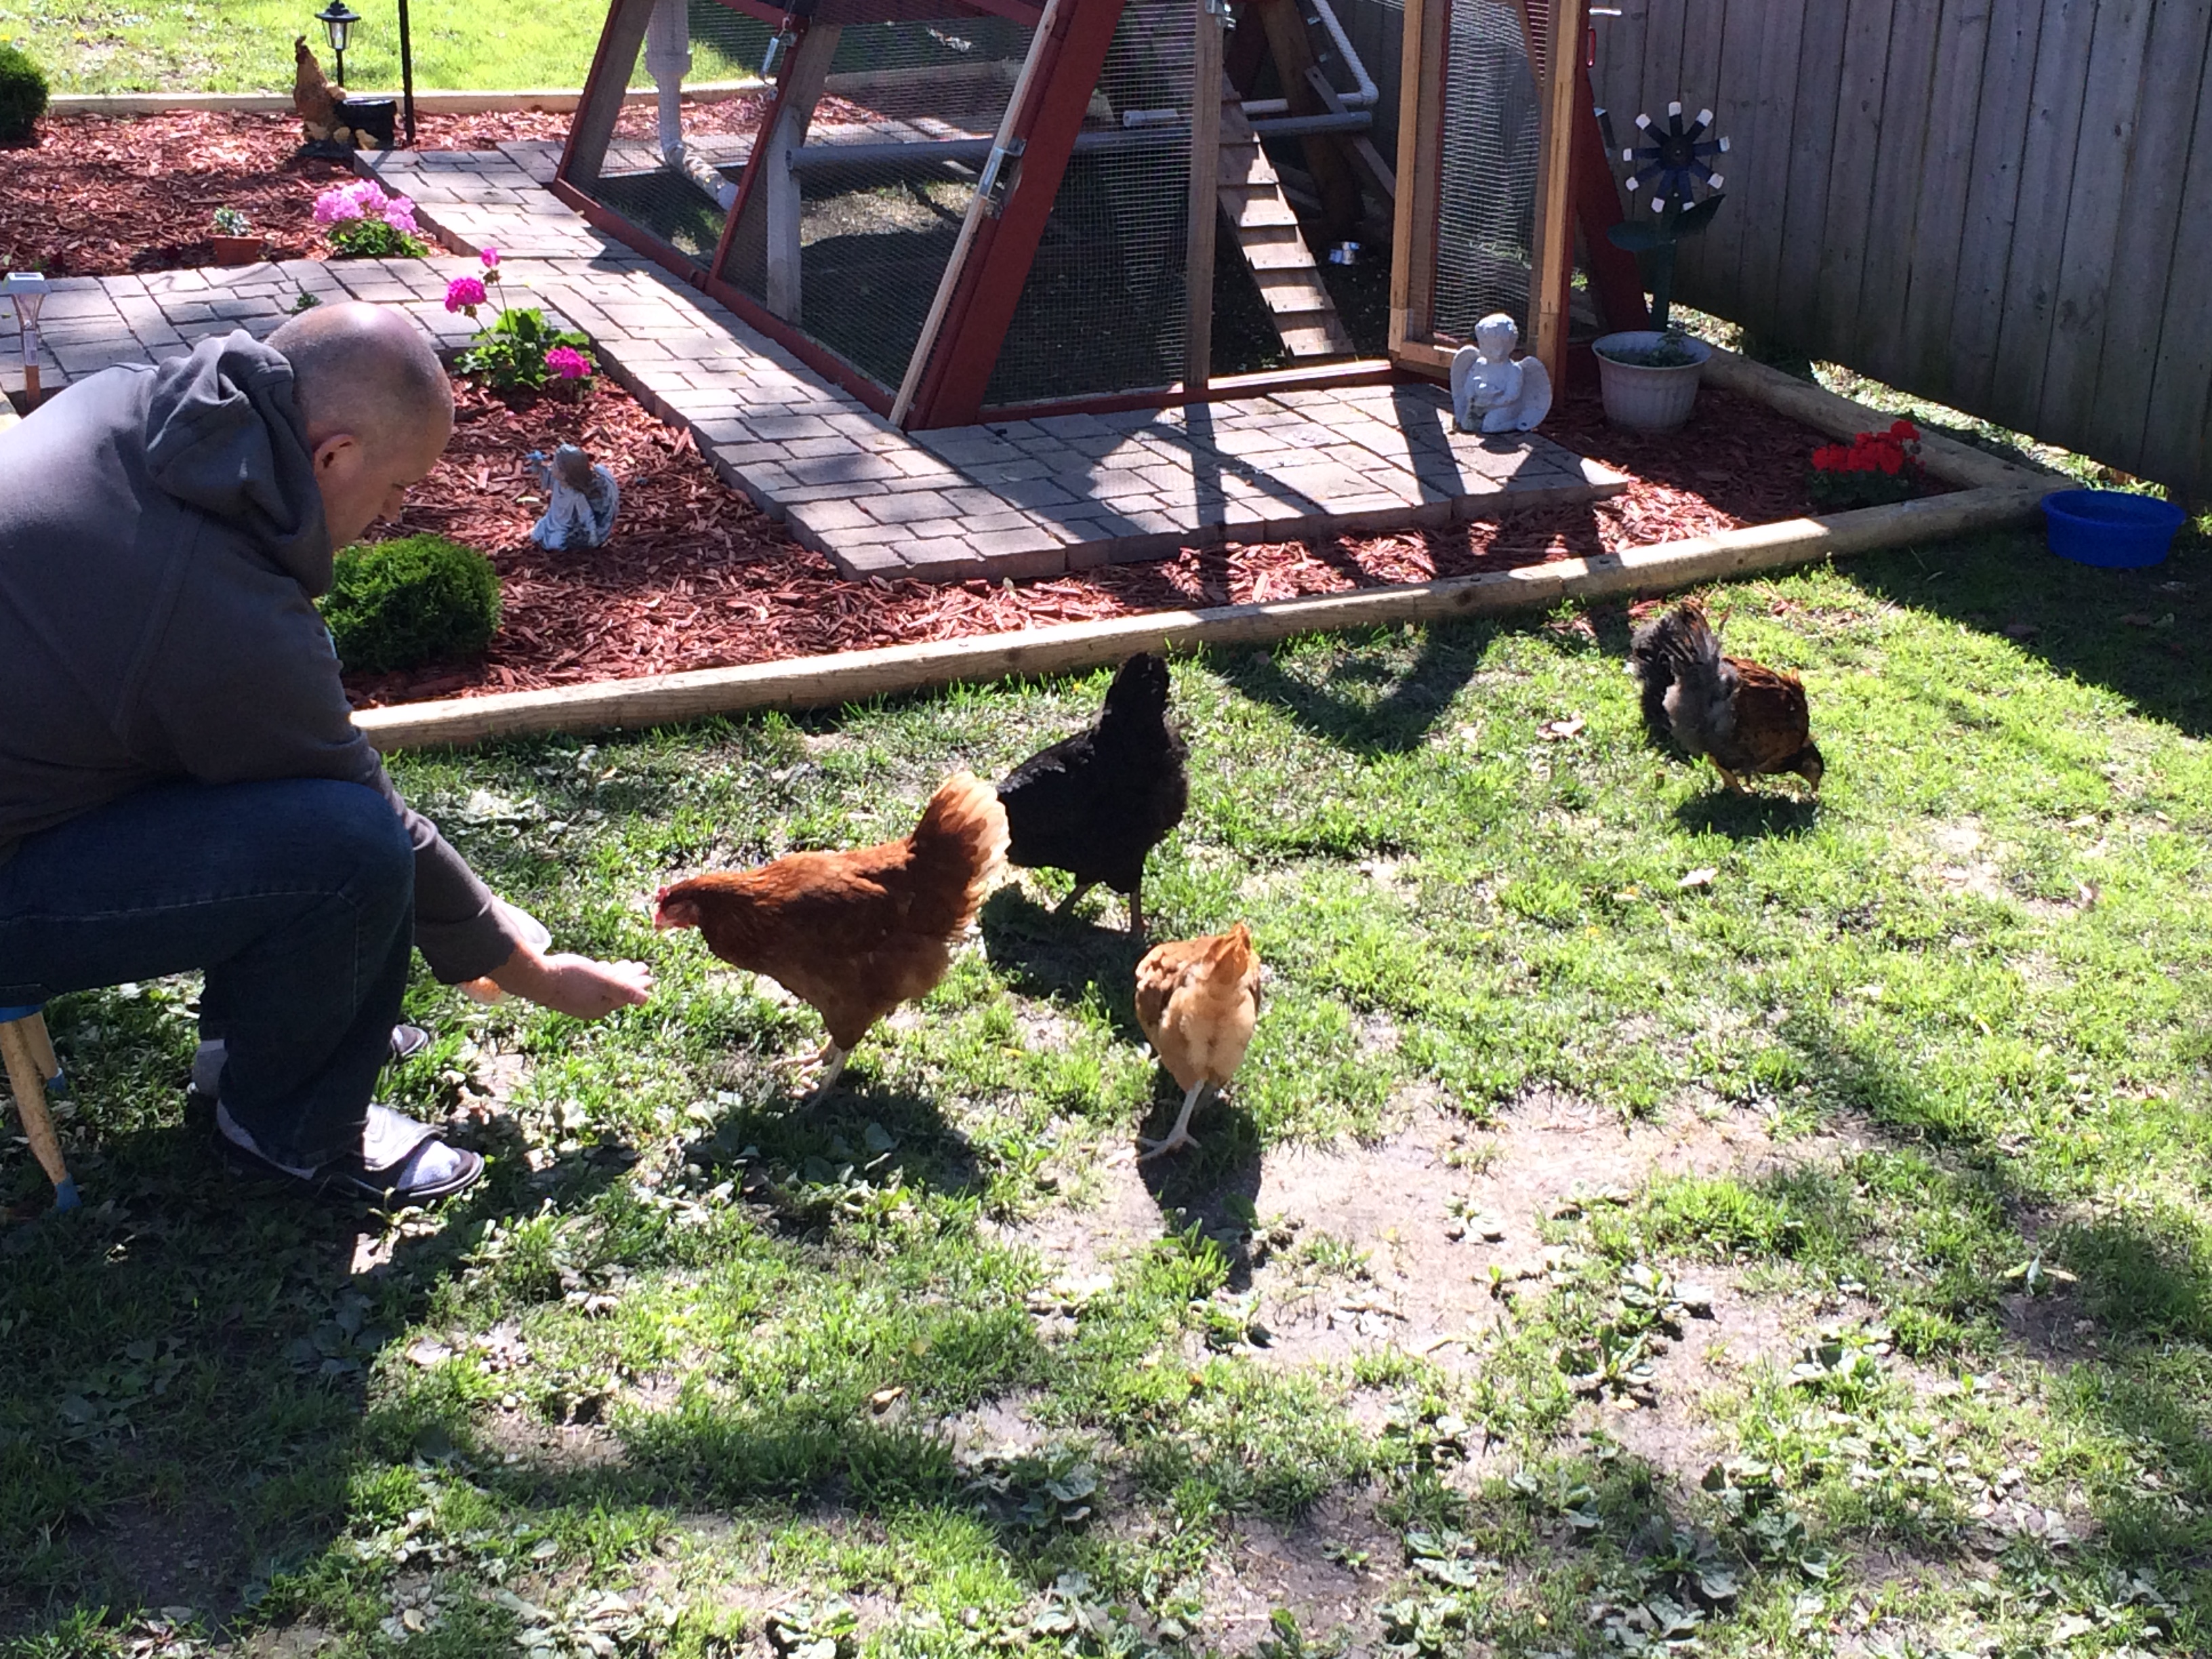 My husband feeding the girls (That he didn't want) lol He spends more time with them than I do.